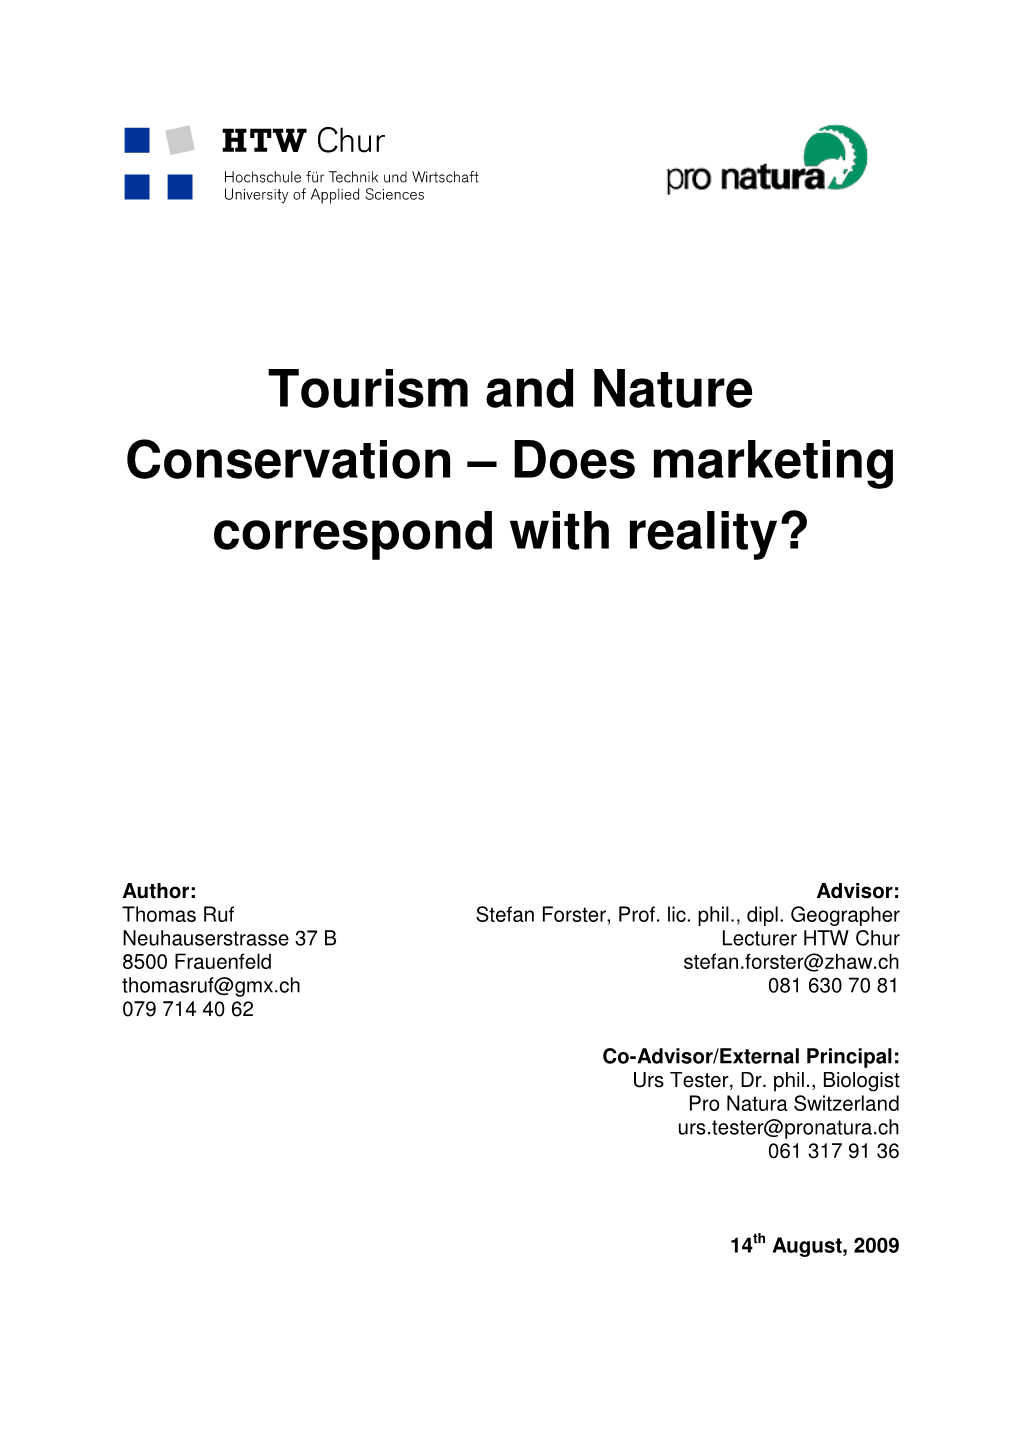 Tourism and Nature Conservation – Does Marketing Correspond with Reality?